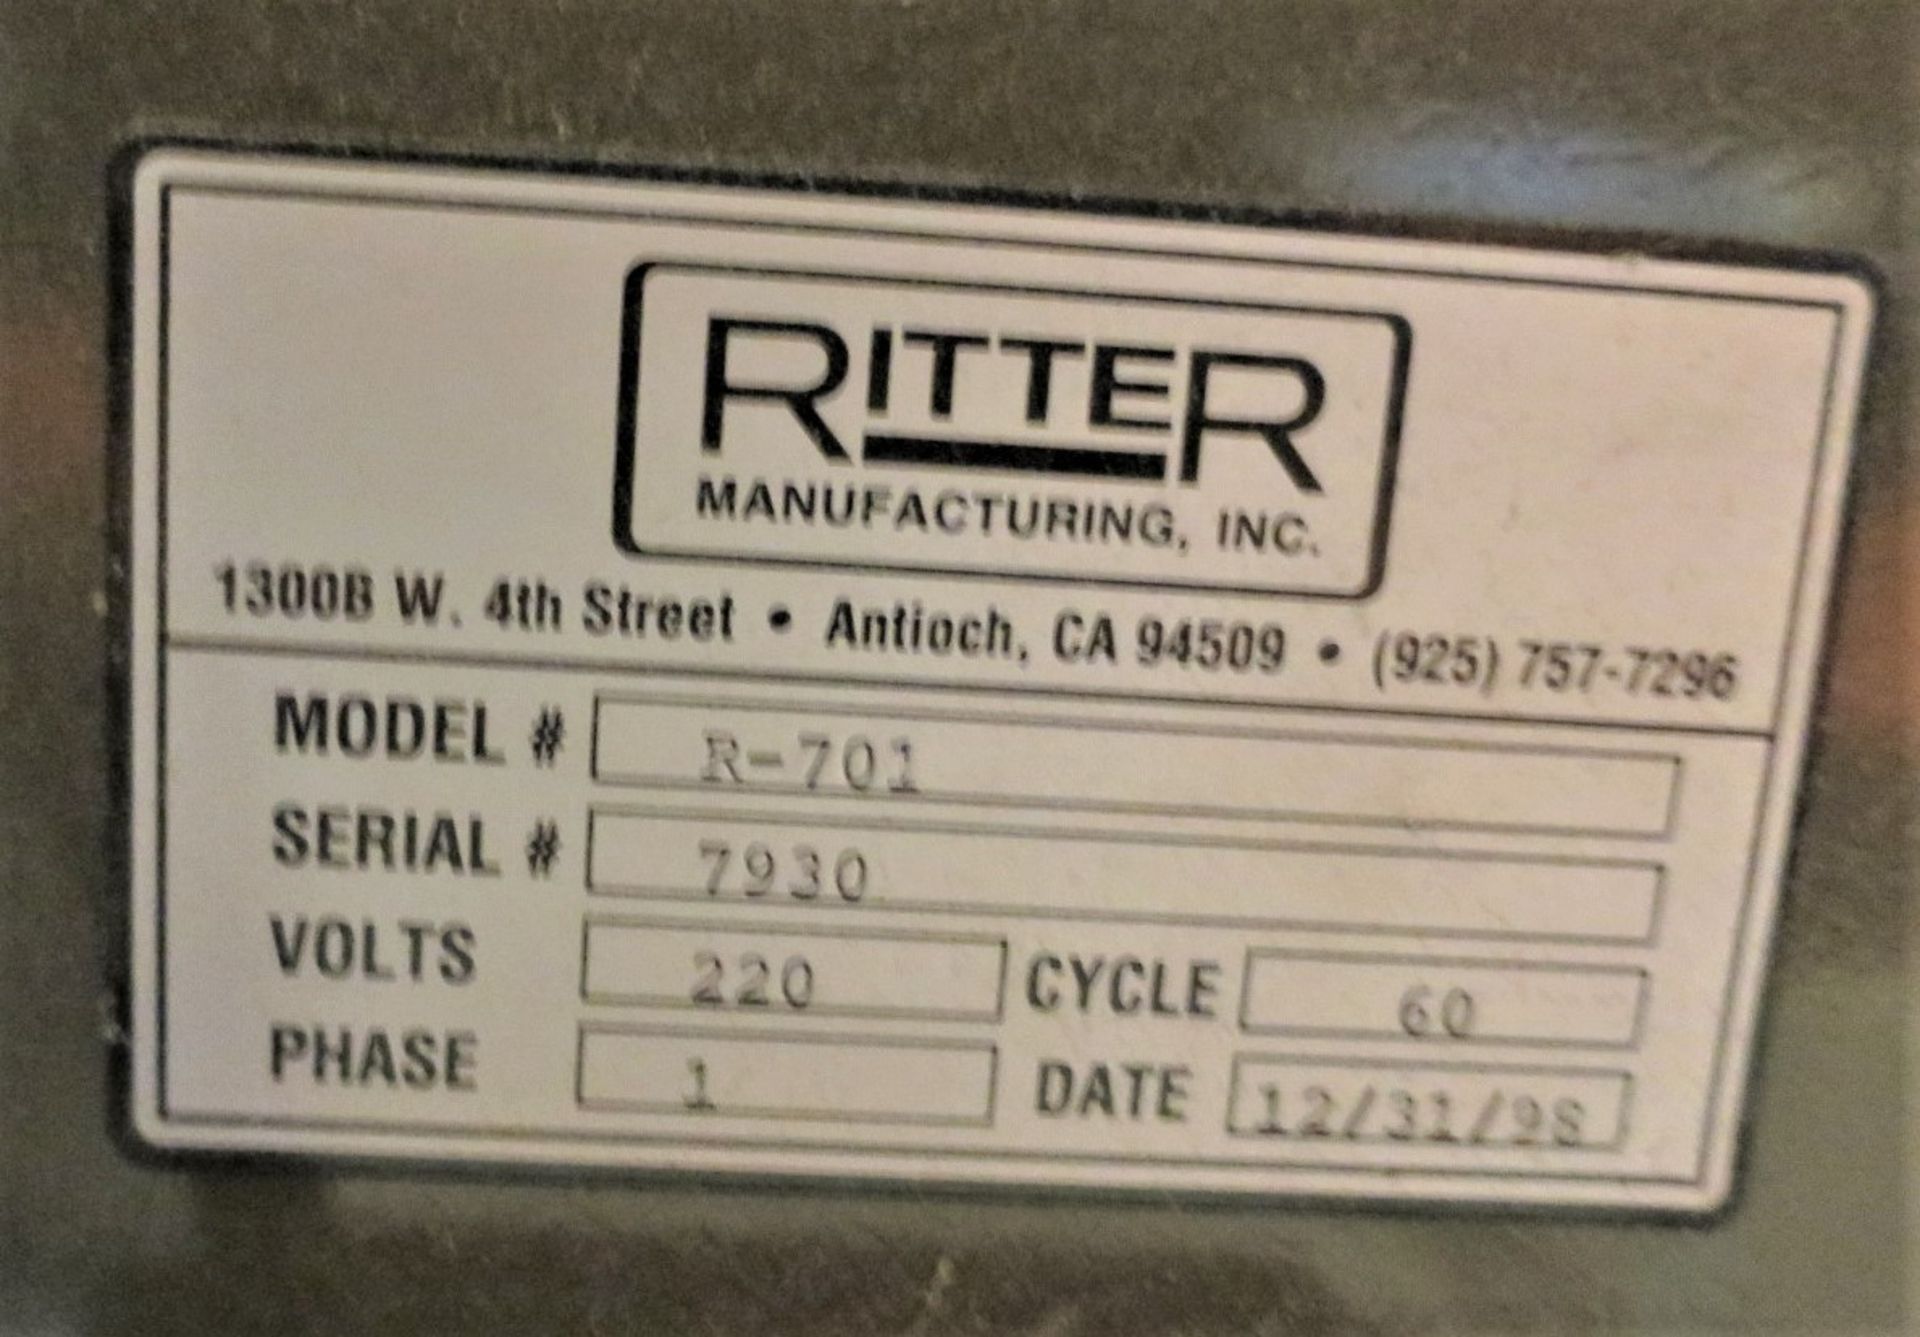 Ritter Manufacturing R-701, 1998, SN 7930 - Image 2 of 2